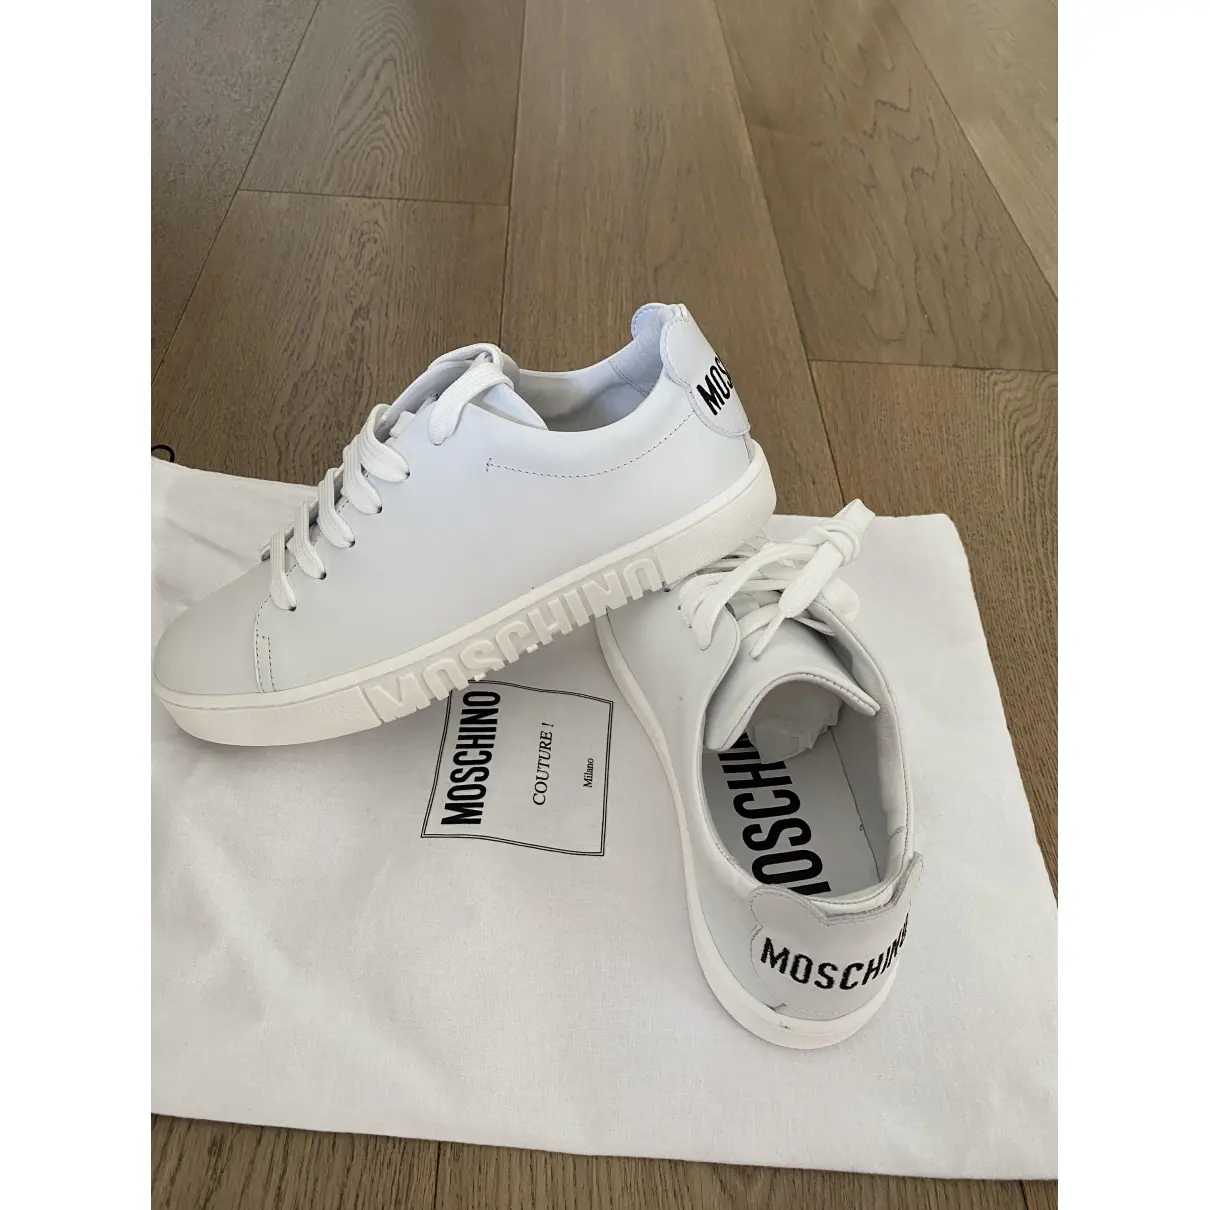 Buy Moschino Leather trainers online